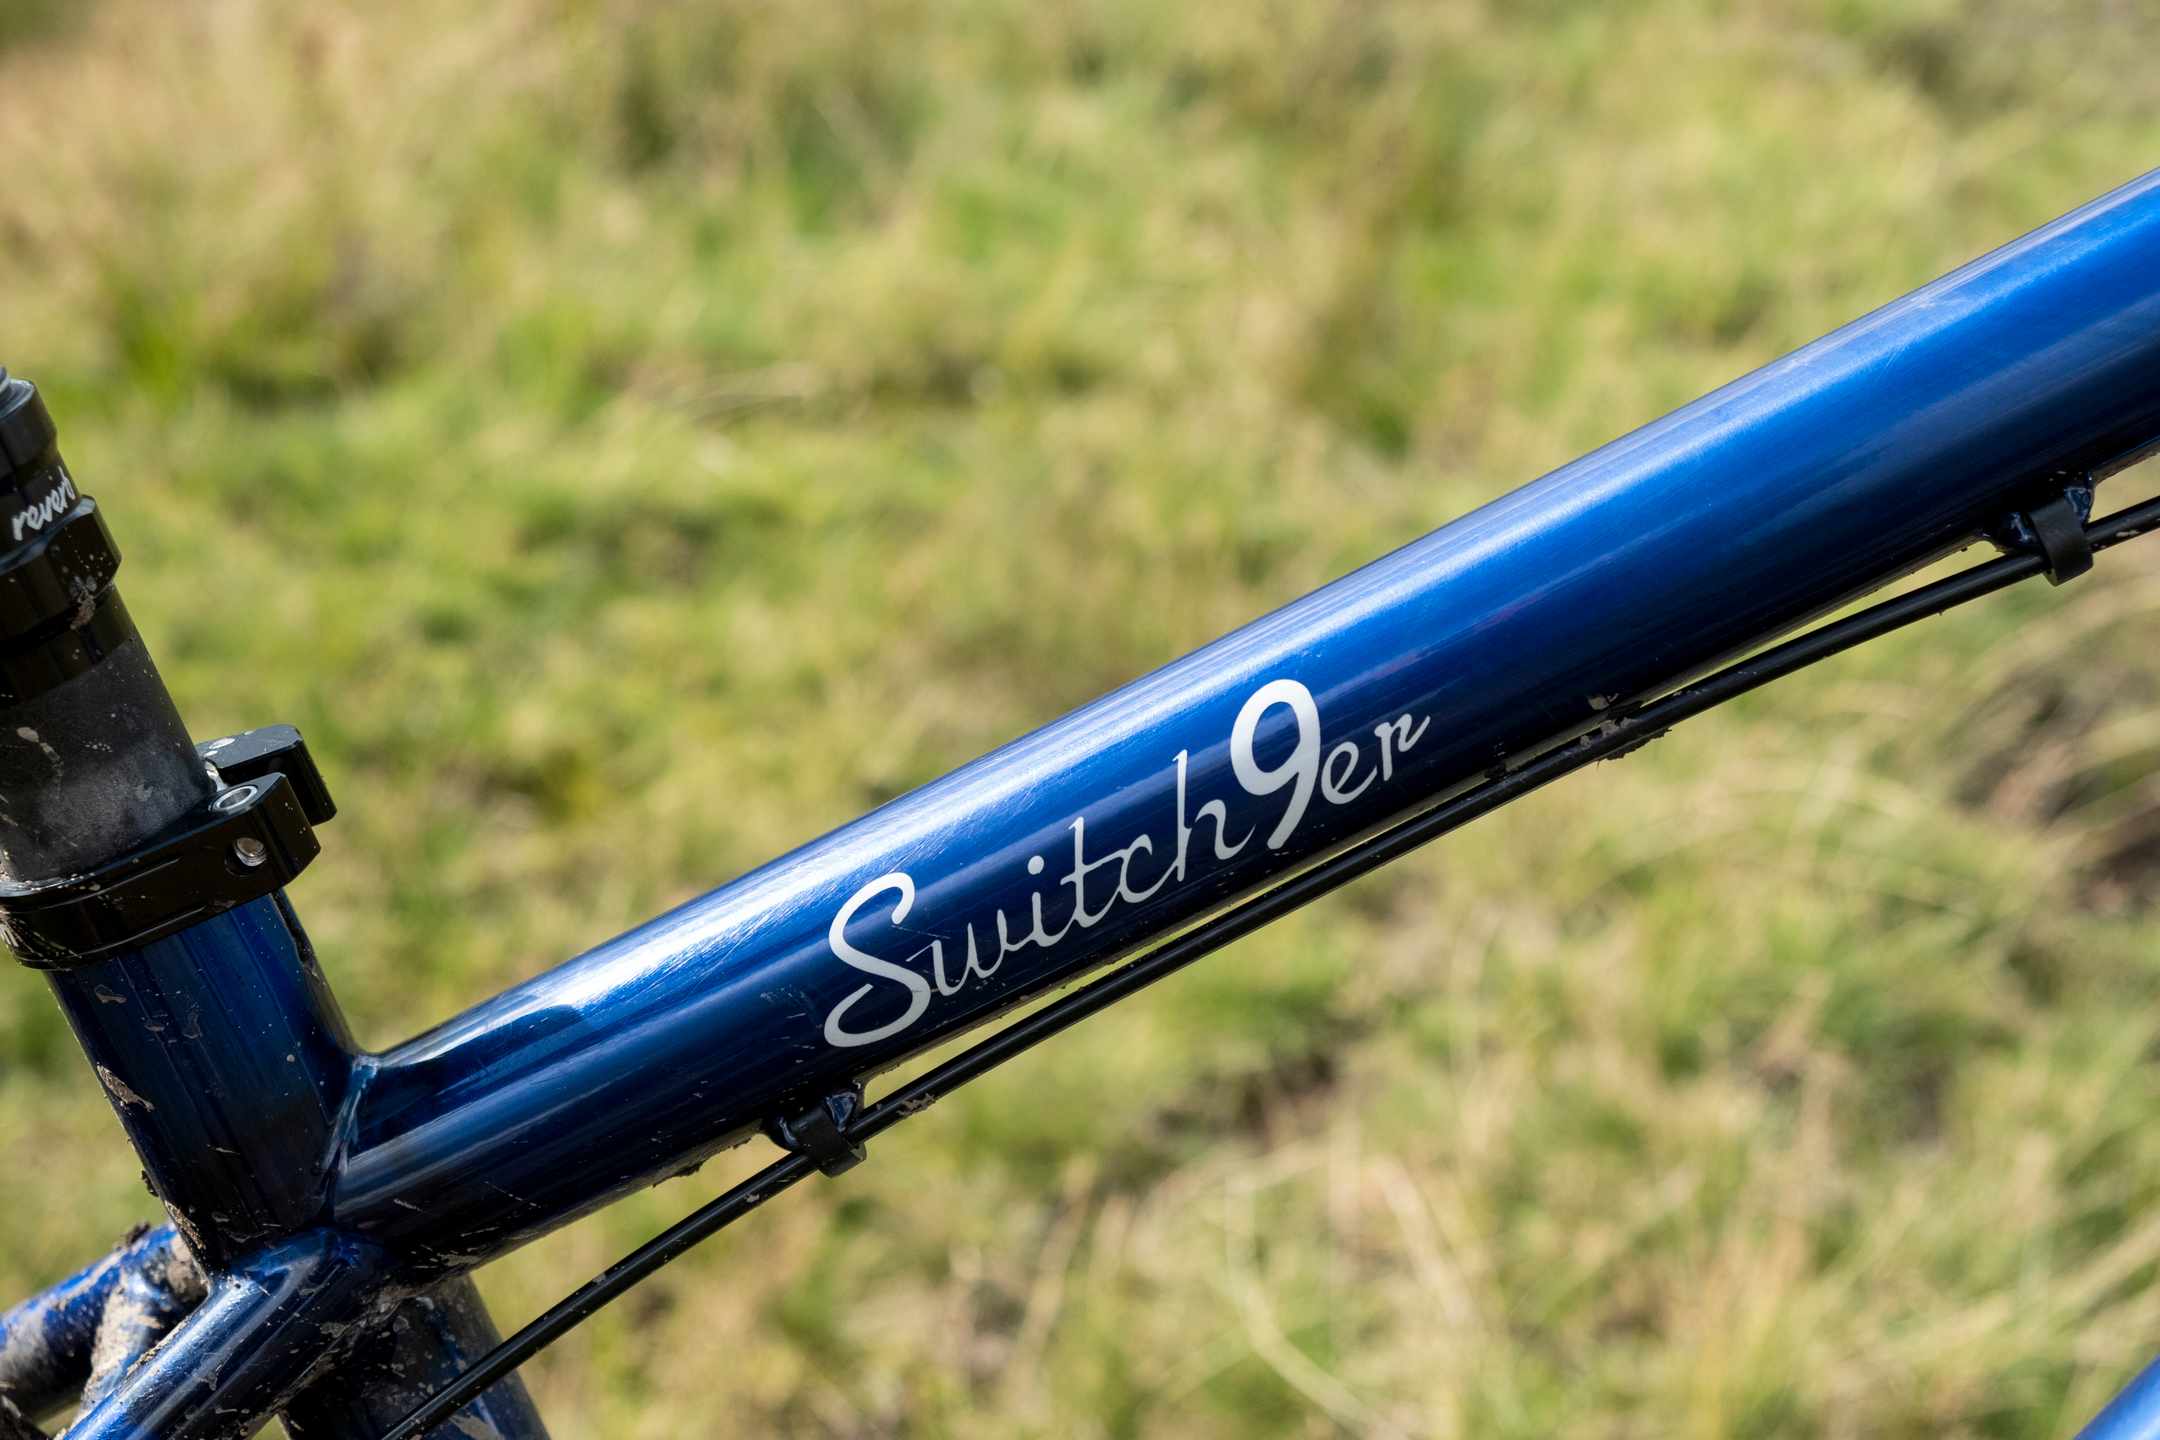 stanton switch9er review